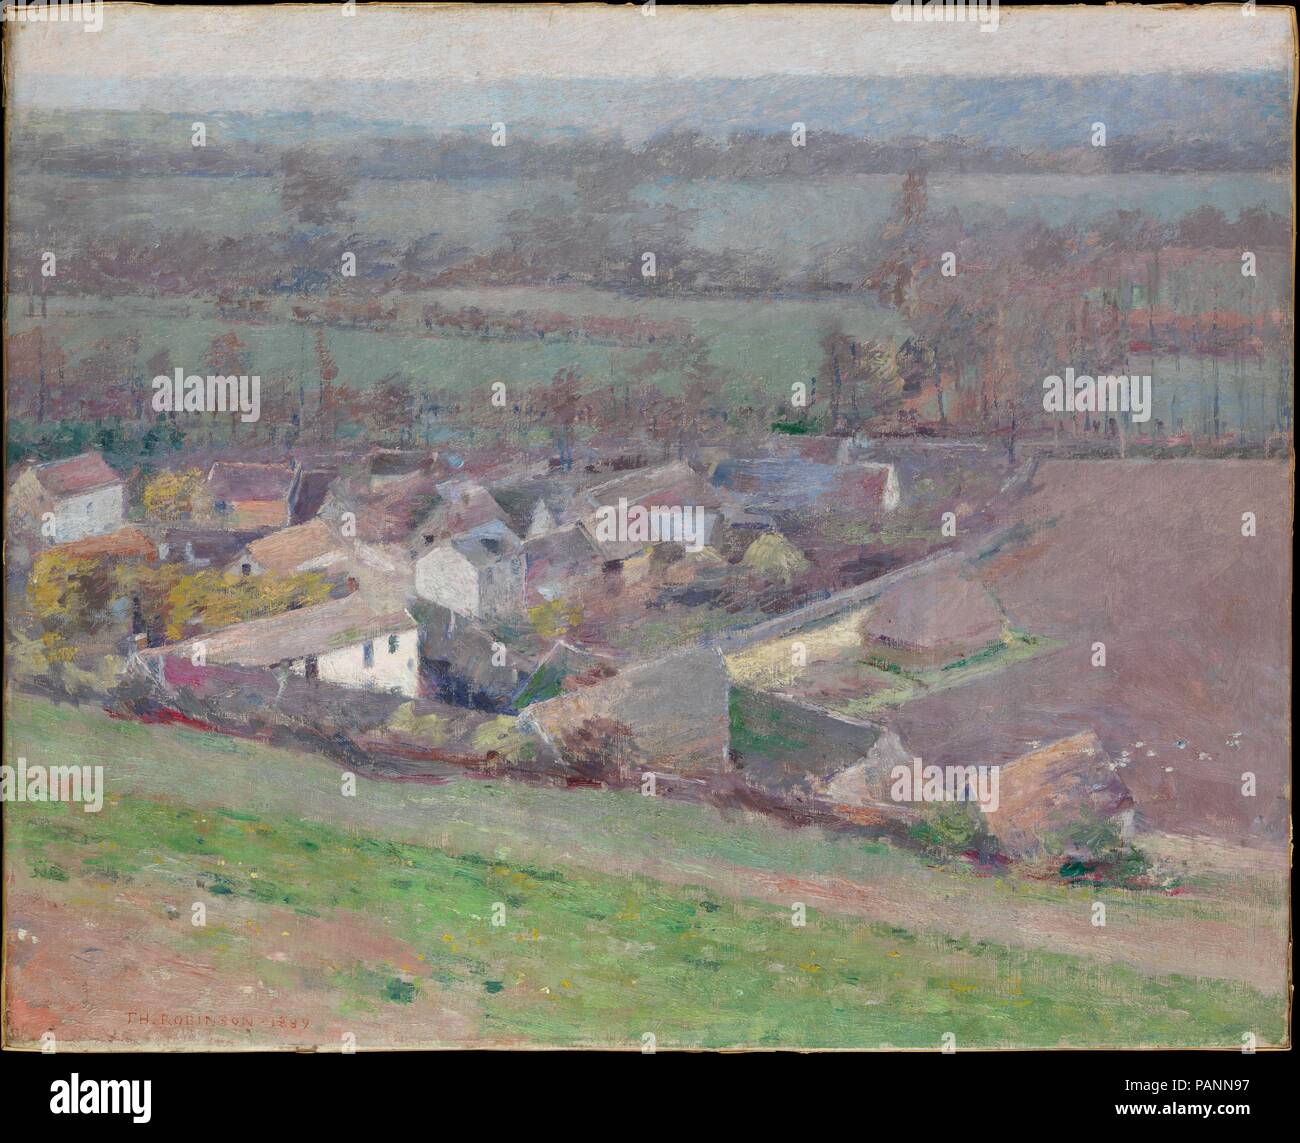 A Bird's-Eye View. Artist: Theodore Robinson (1852-1896). Dimensions: 25 3/4 x 32 in. (65.4 x 81.3 cm). Date: 1889.  Theodore Robinson, although academically trained at France's École des Beaux-Arts, became the leading American disciple of the progressive impressionist Claude Monet. Living as a close friend and neighbor of the famous painter in the artists' colony of Giverny between 1887 and 1892, Robinson experimented with plein-air (outdoor) painting in numerous depictions of that bucolic village, such as this work. Museum: Metropolitan Museum of Art, New York, USA. Stock Photo